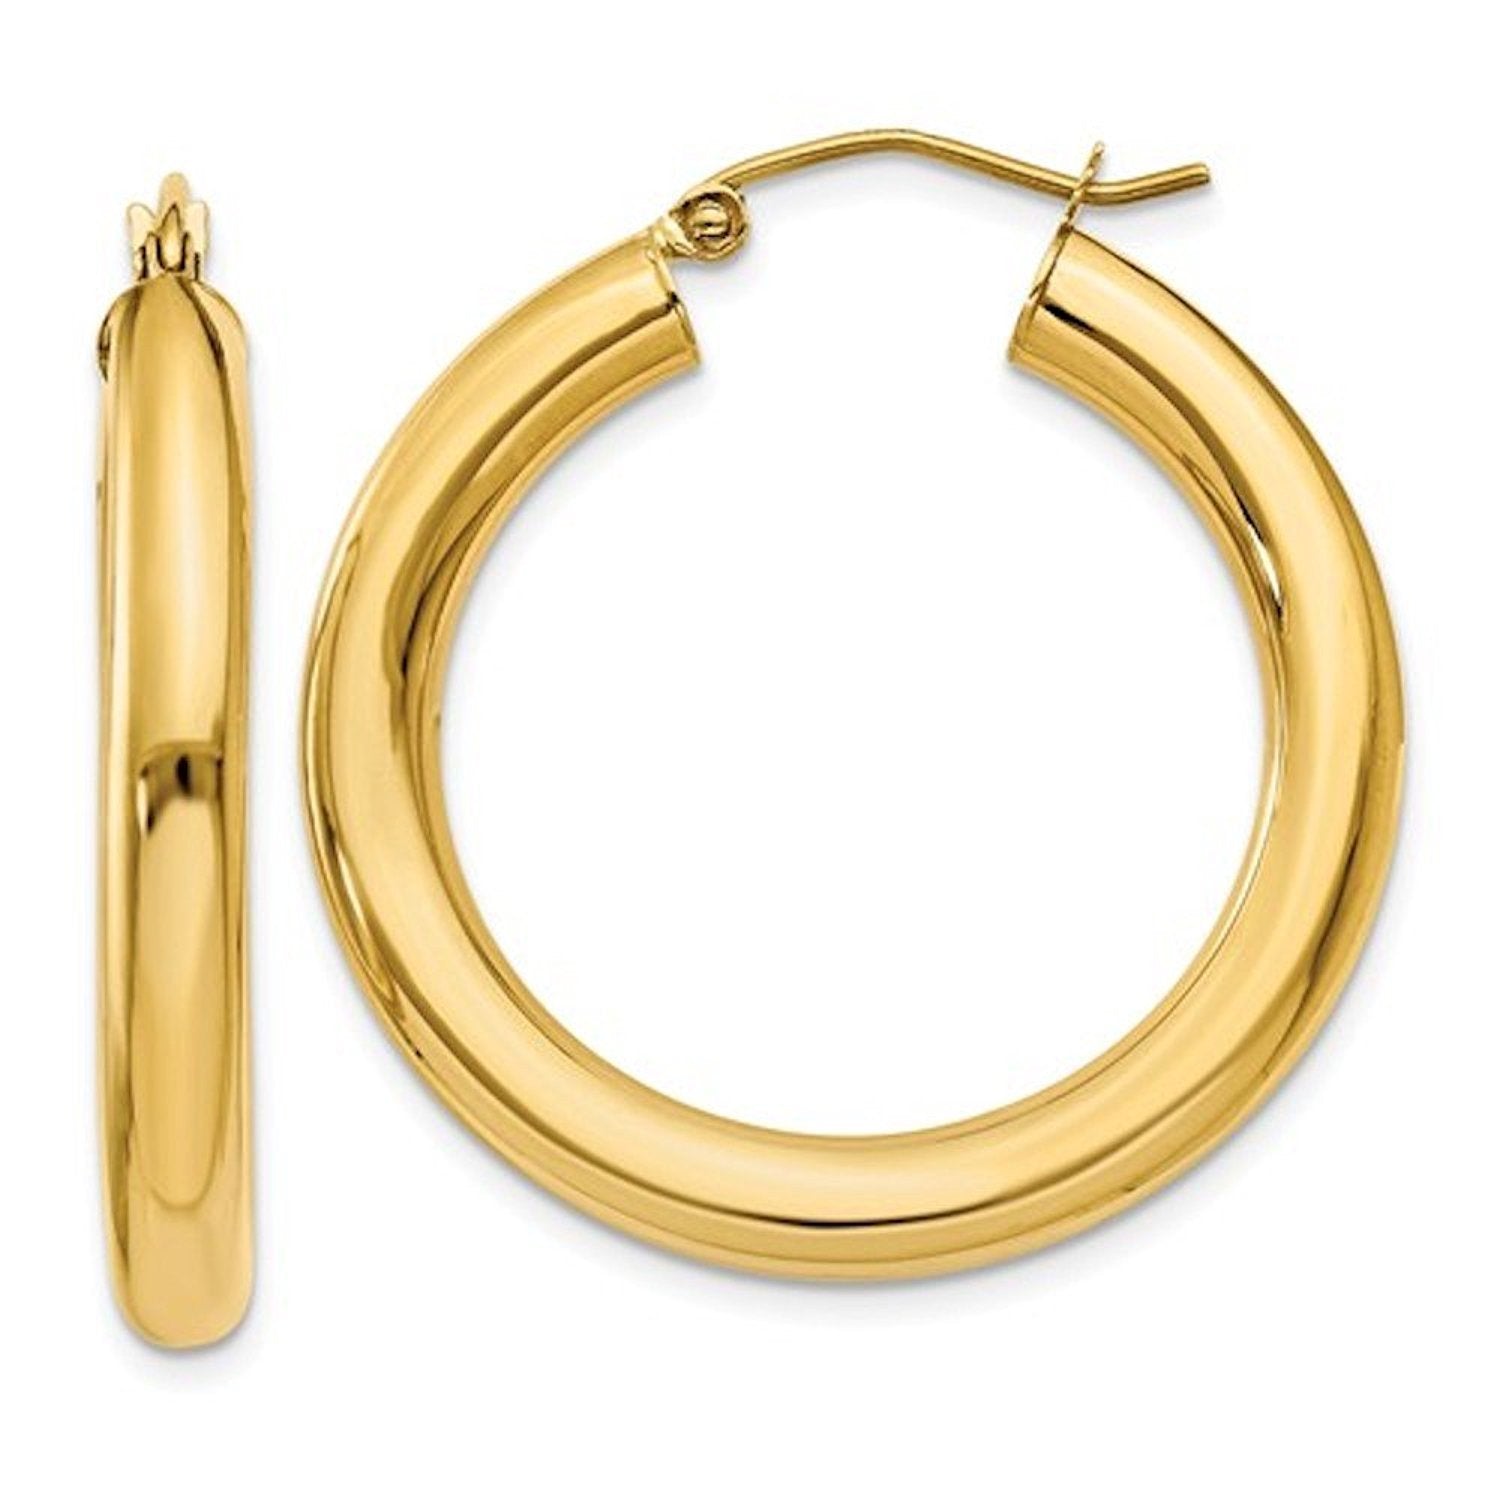 10K Yellow Gold Classic Round Hoop Earrings 30mmx4mm